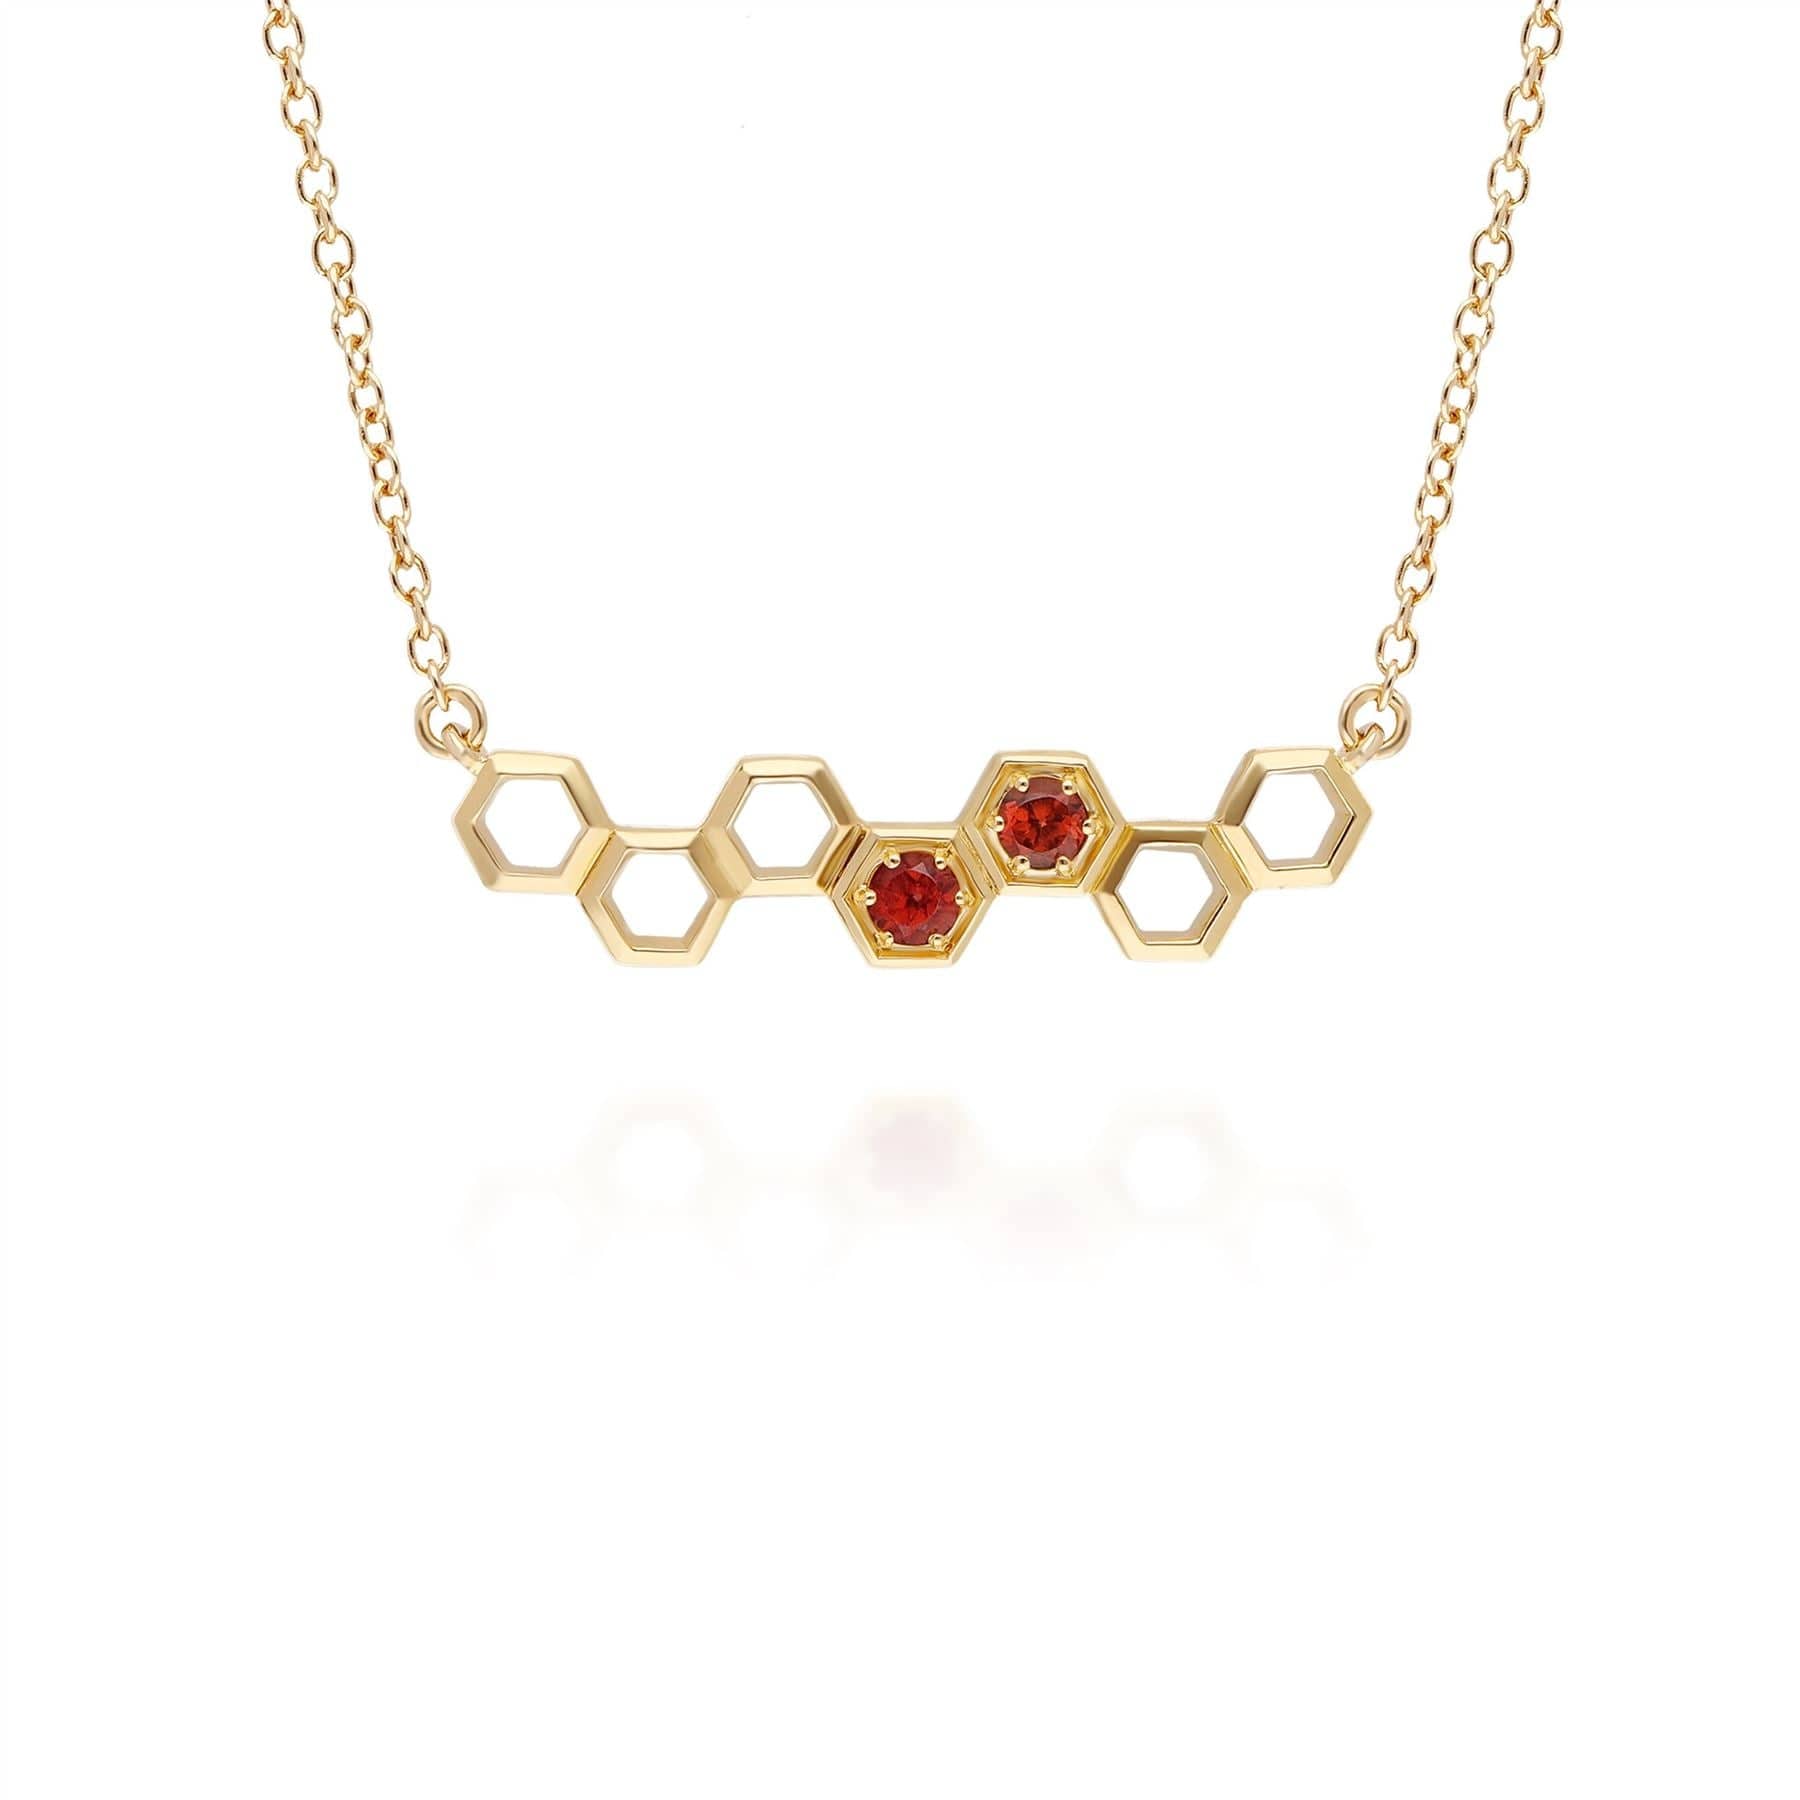 Image of Honeycomb Inspired Garnet Link Necklace in 9ct Yellow Gold